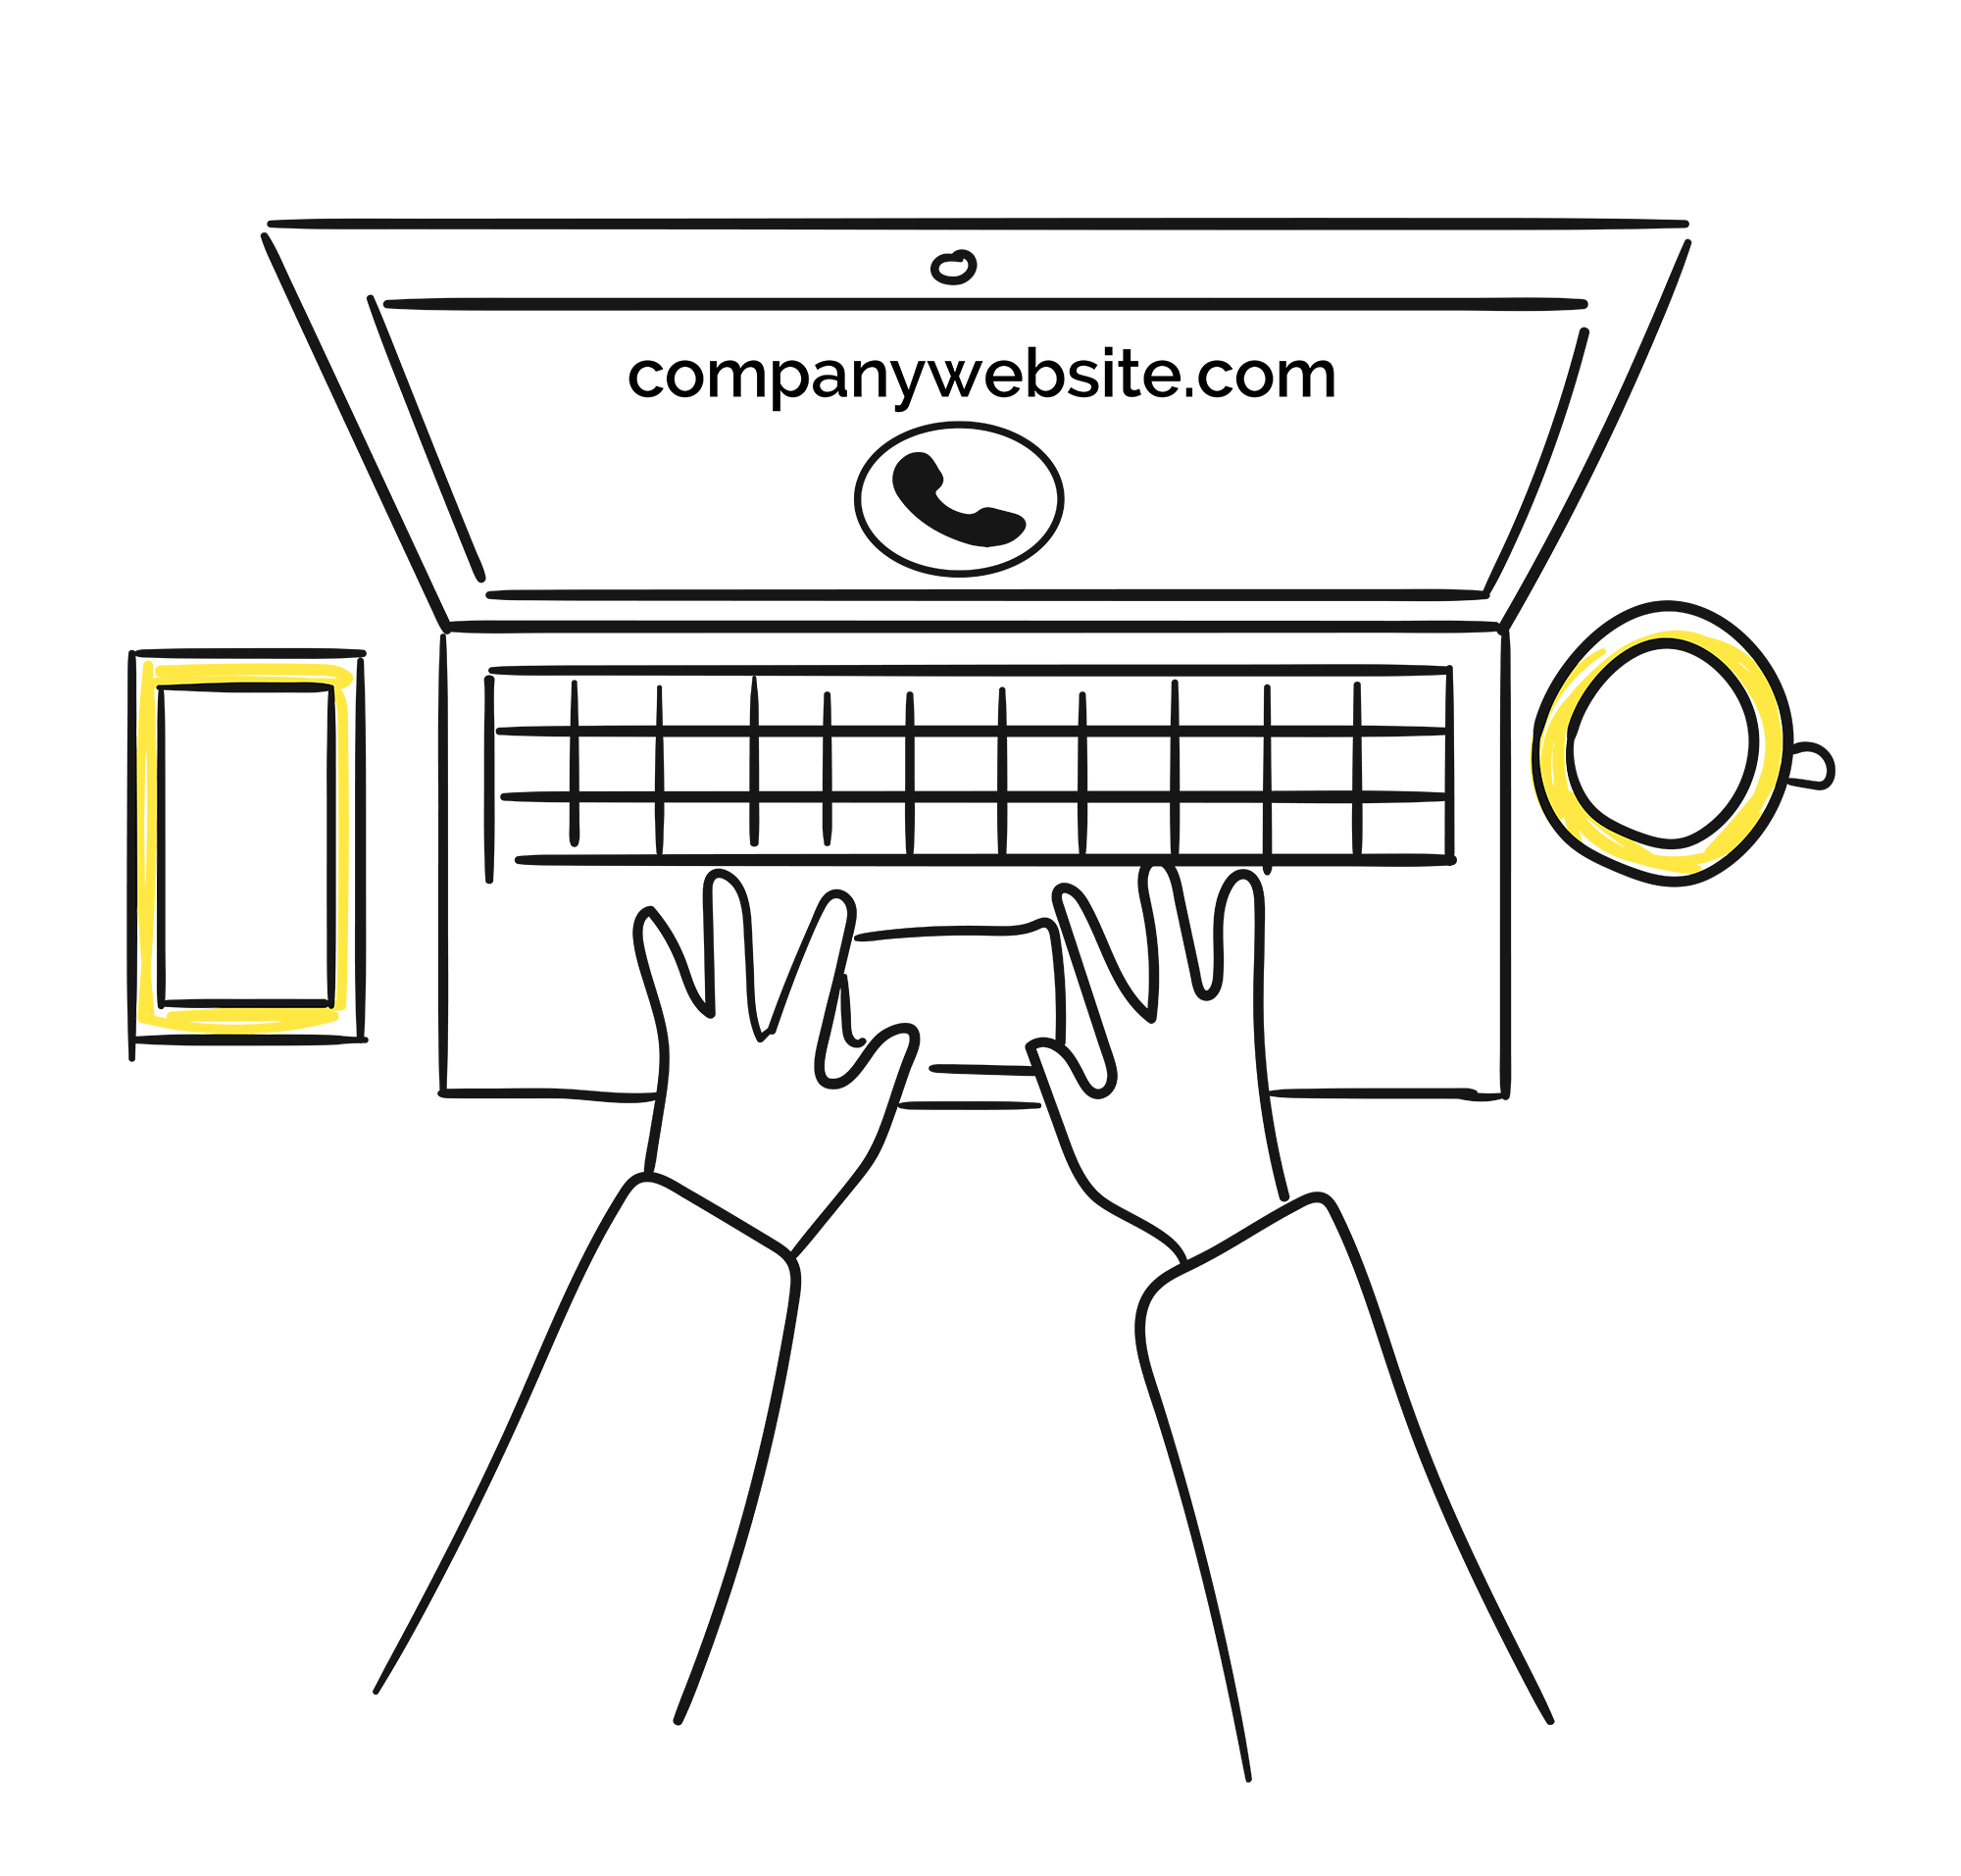 A sketch of a hand using a laptop to design a company website.